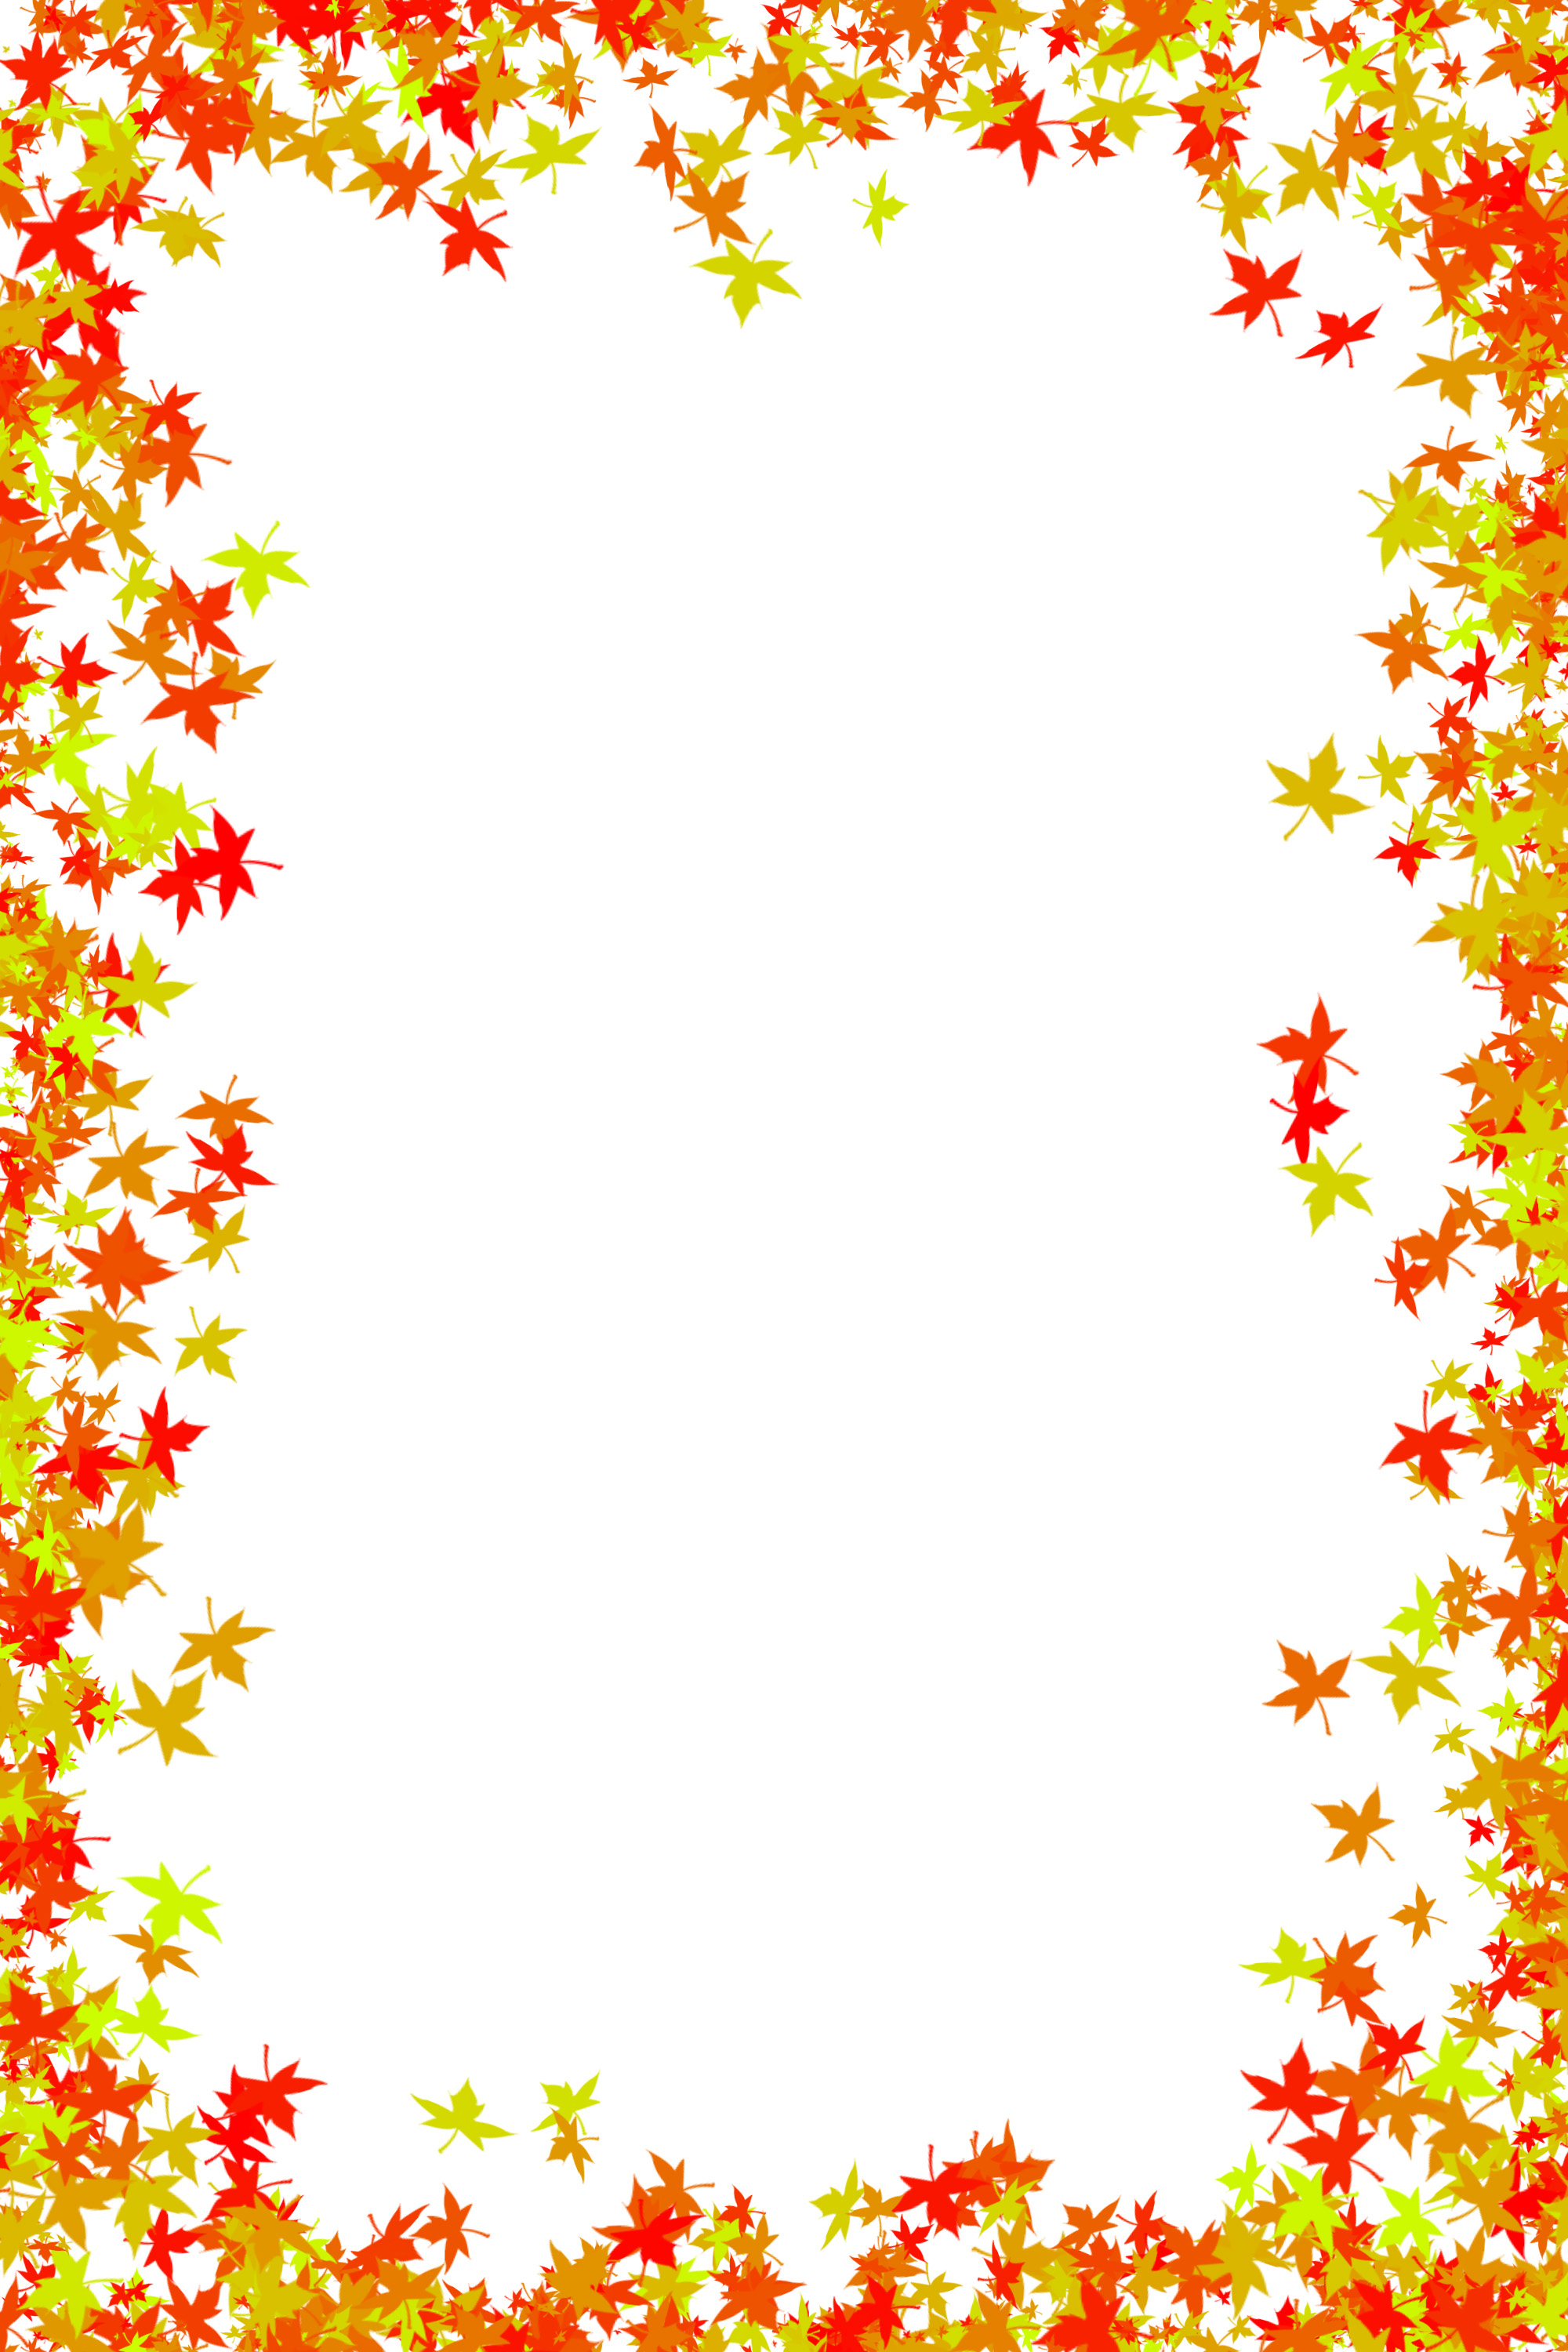 Maple Leaves Autumn Frame Free Backgrounds And Textures Cr103 Com